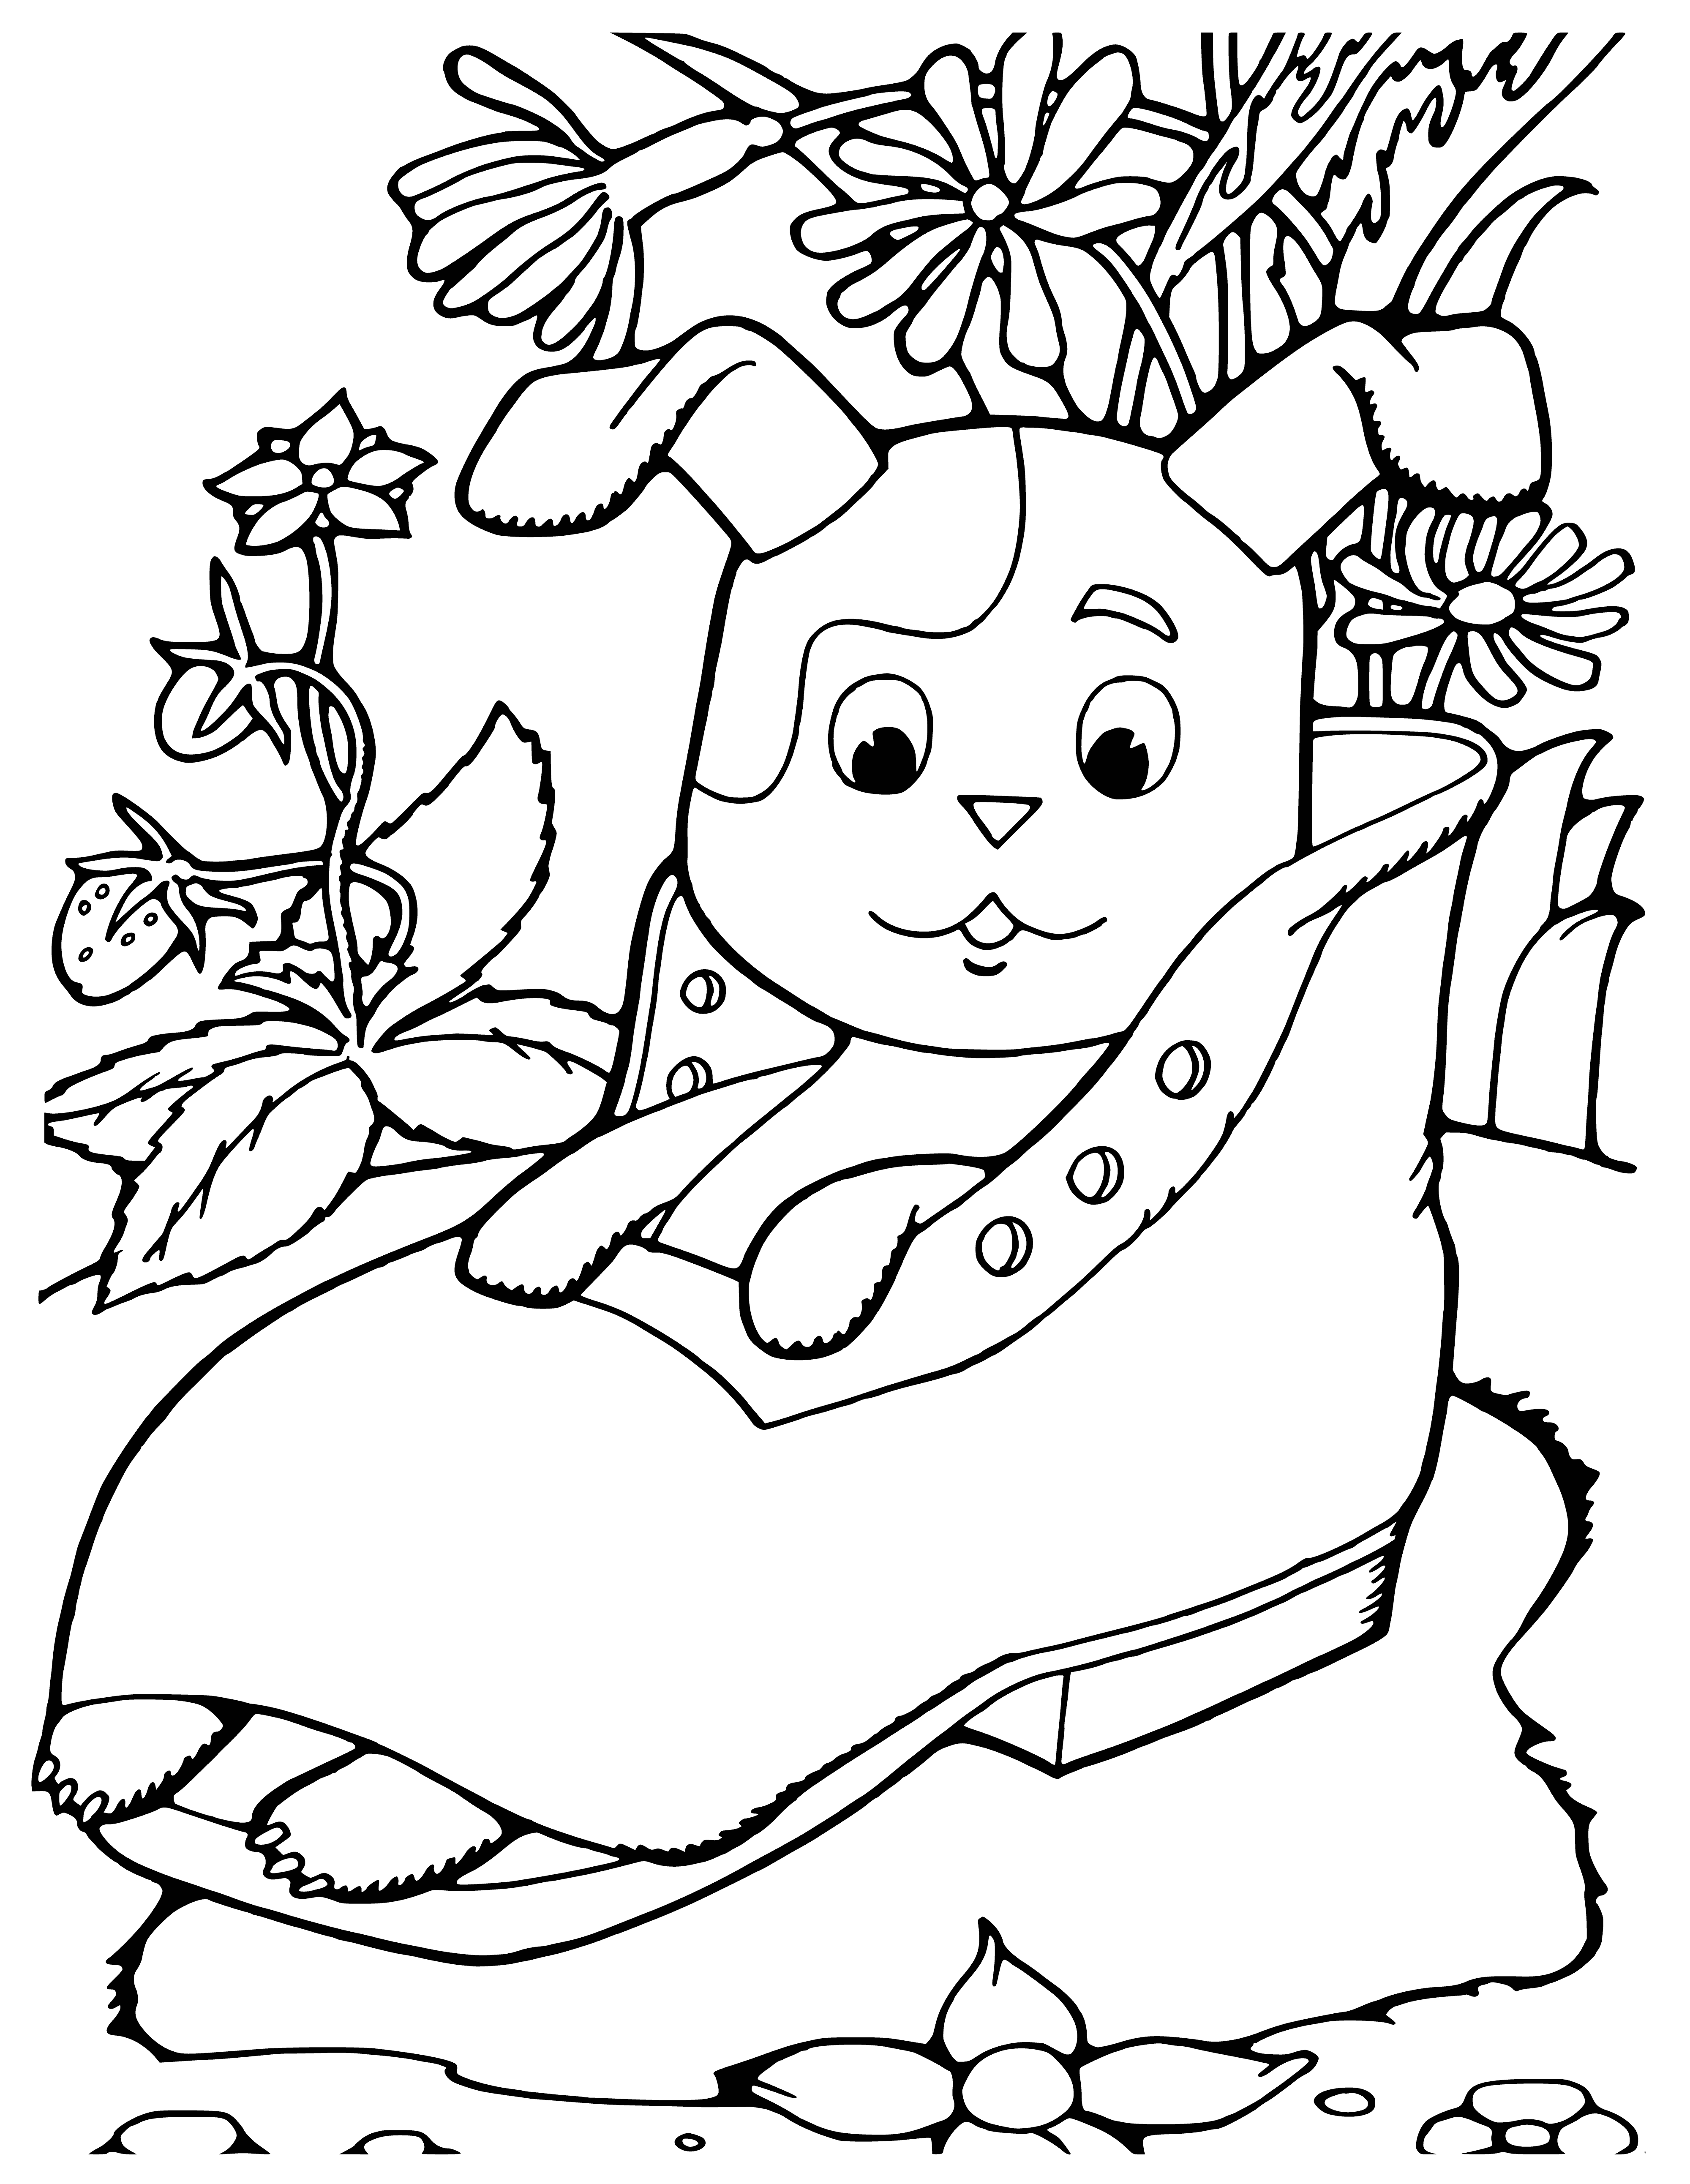 coloring page: Adorable kitten named Woof Ball colors and plays with a ball; it's small and fluffy with white fur and blue eyes.